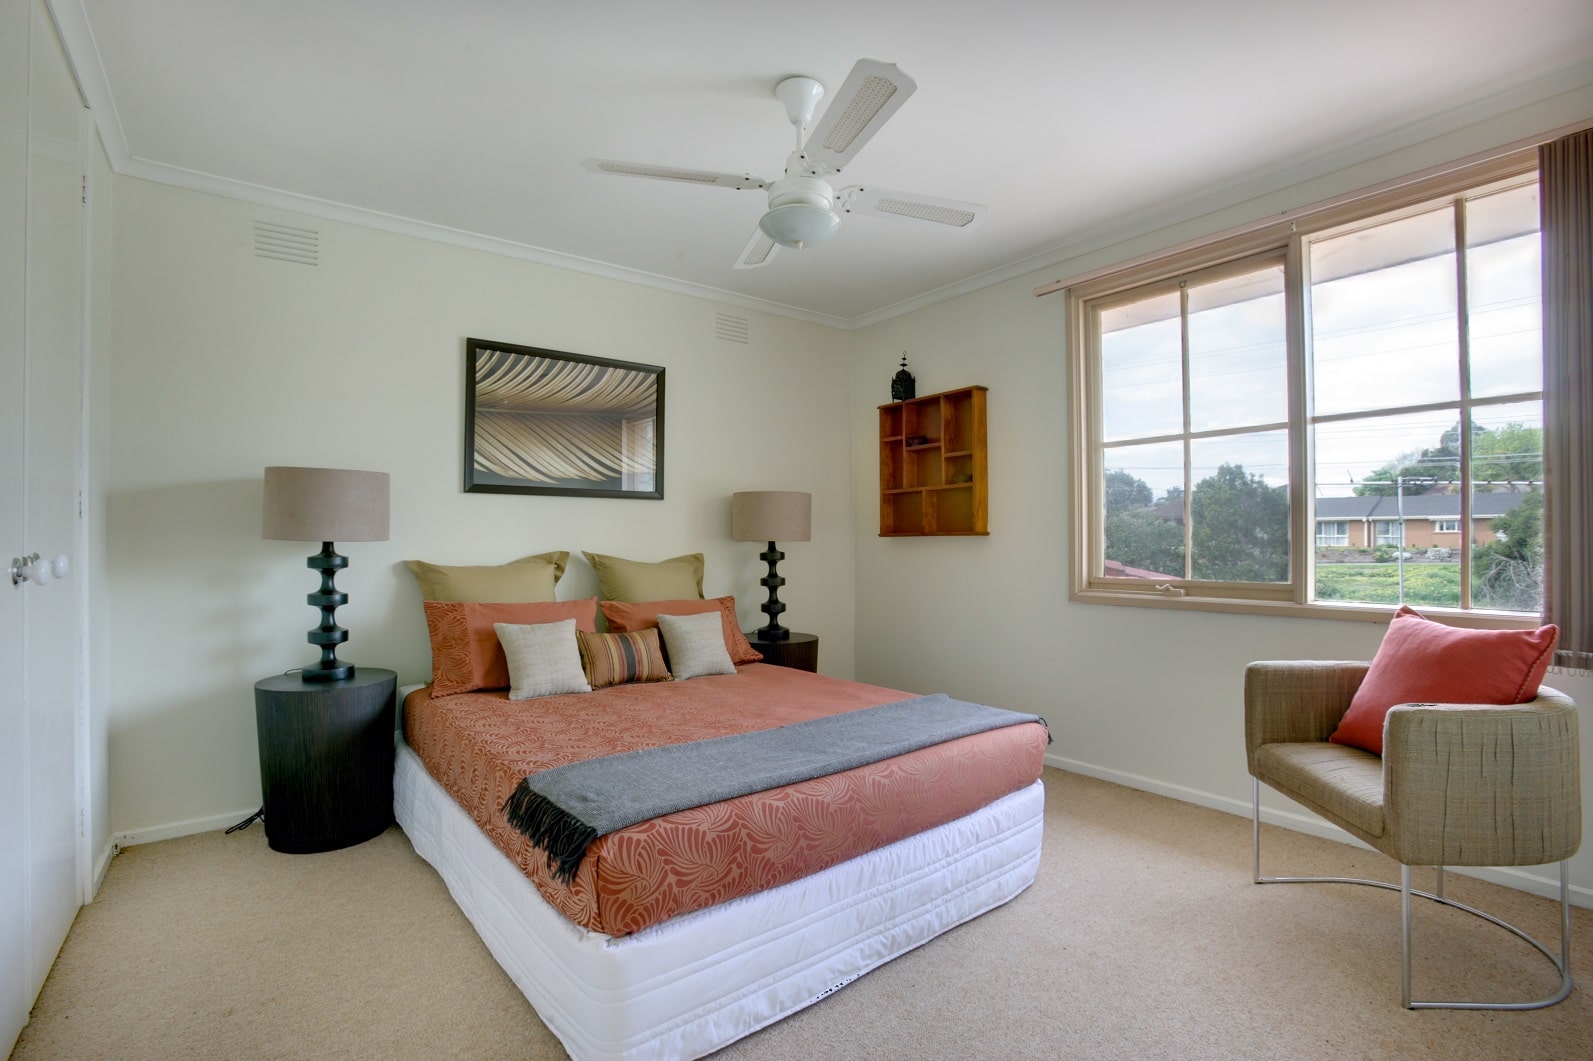 Guide on Choosing the Perfect Ceiling Fan Installation in Singapore